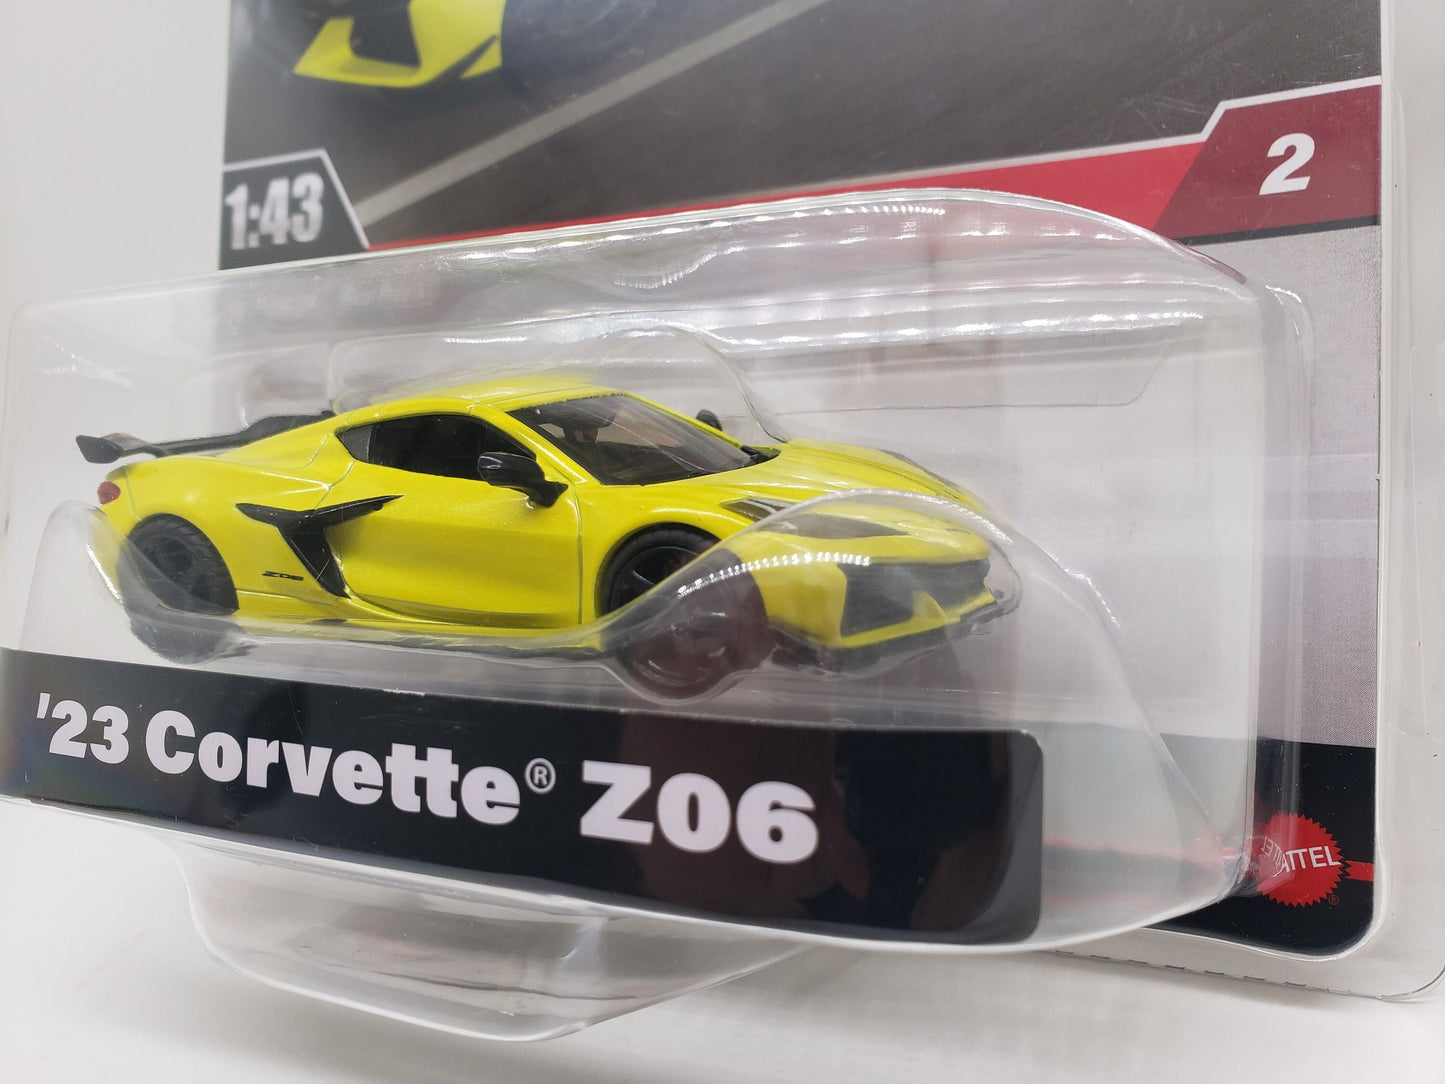 Hot Wheels 23 Corvette ZO6 Accelerate Yellow Perfect Birthday Gift Miniature Collectable 143 Scale Model Toy Car